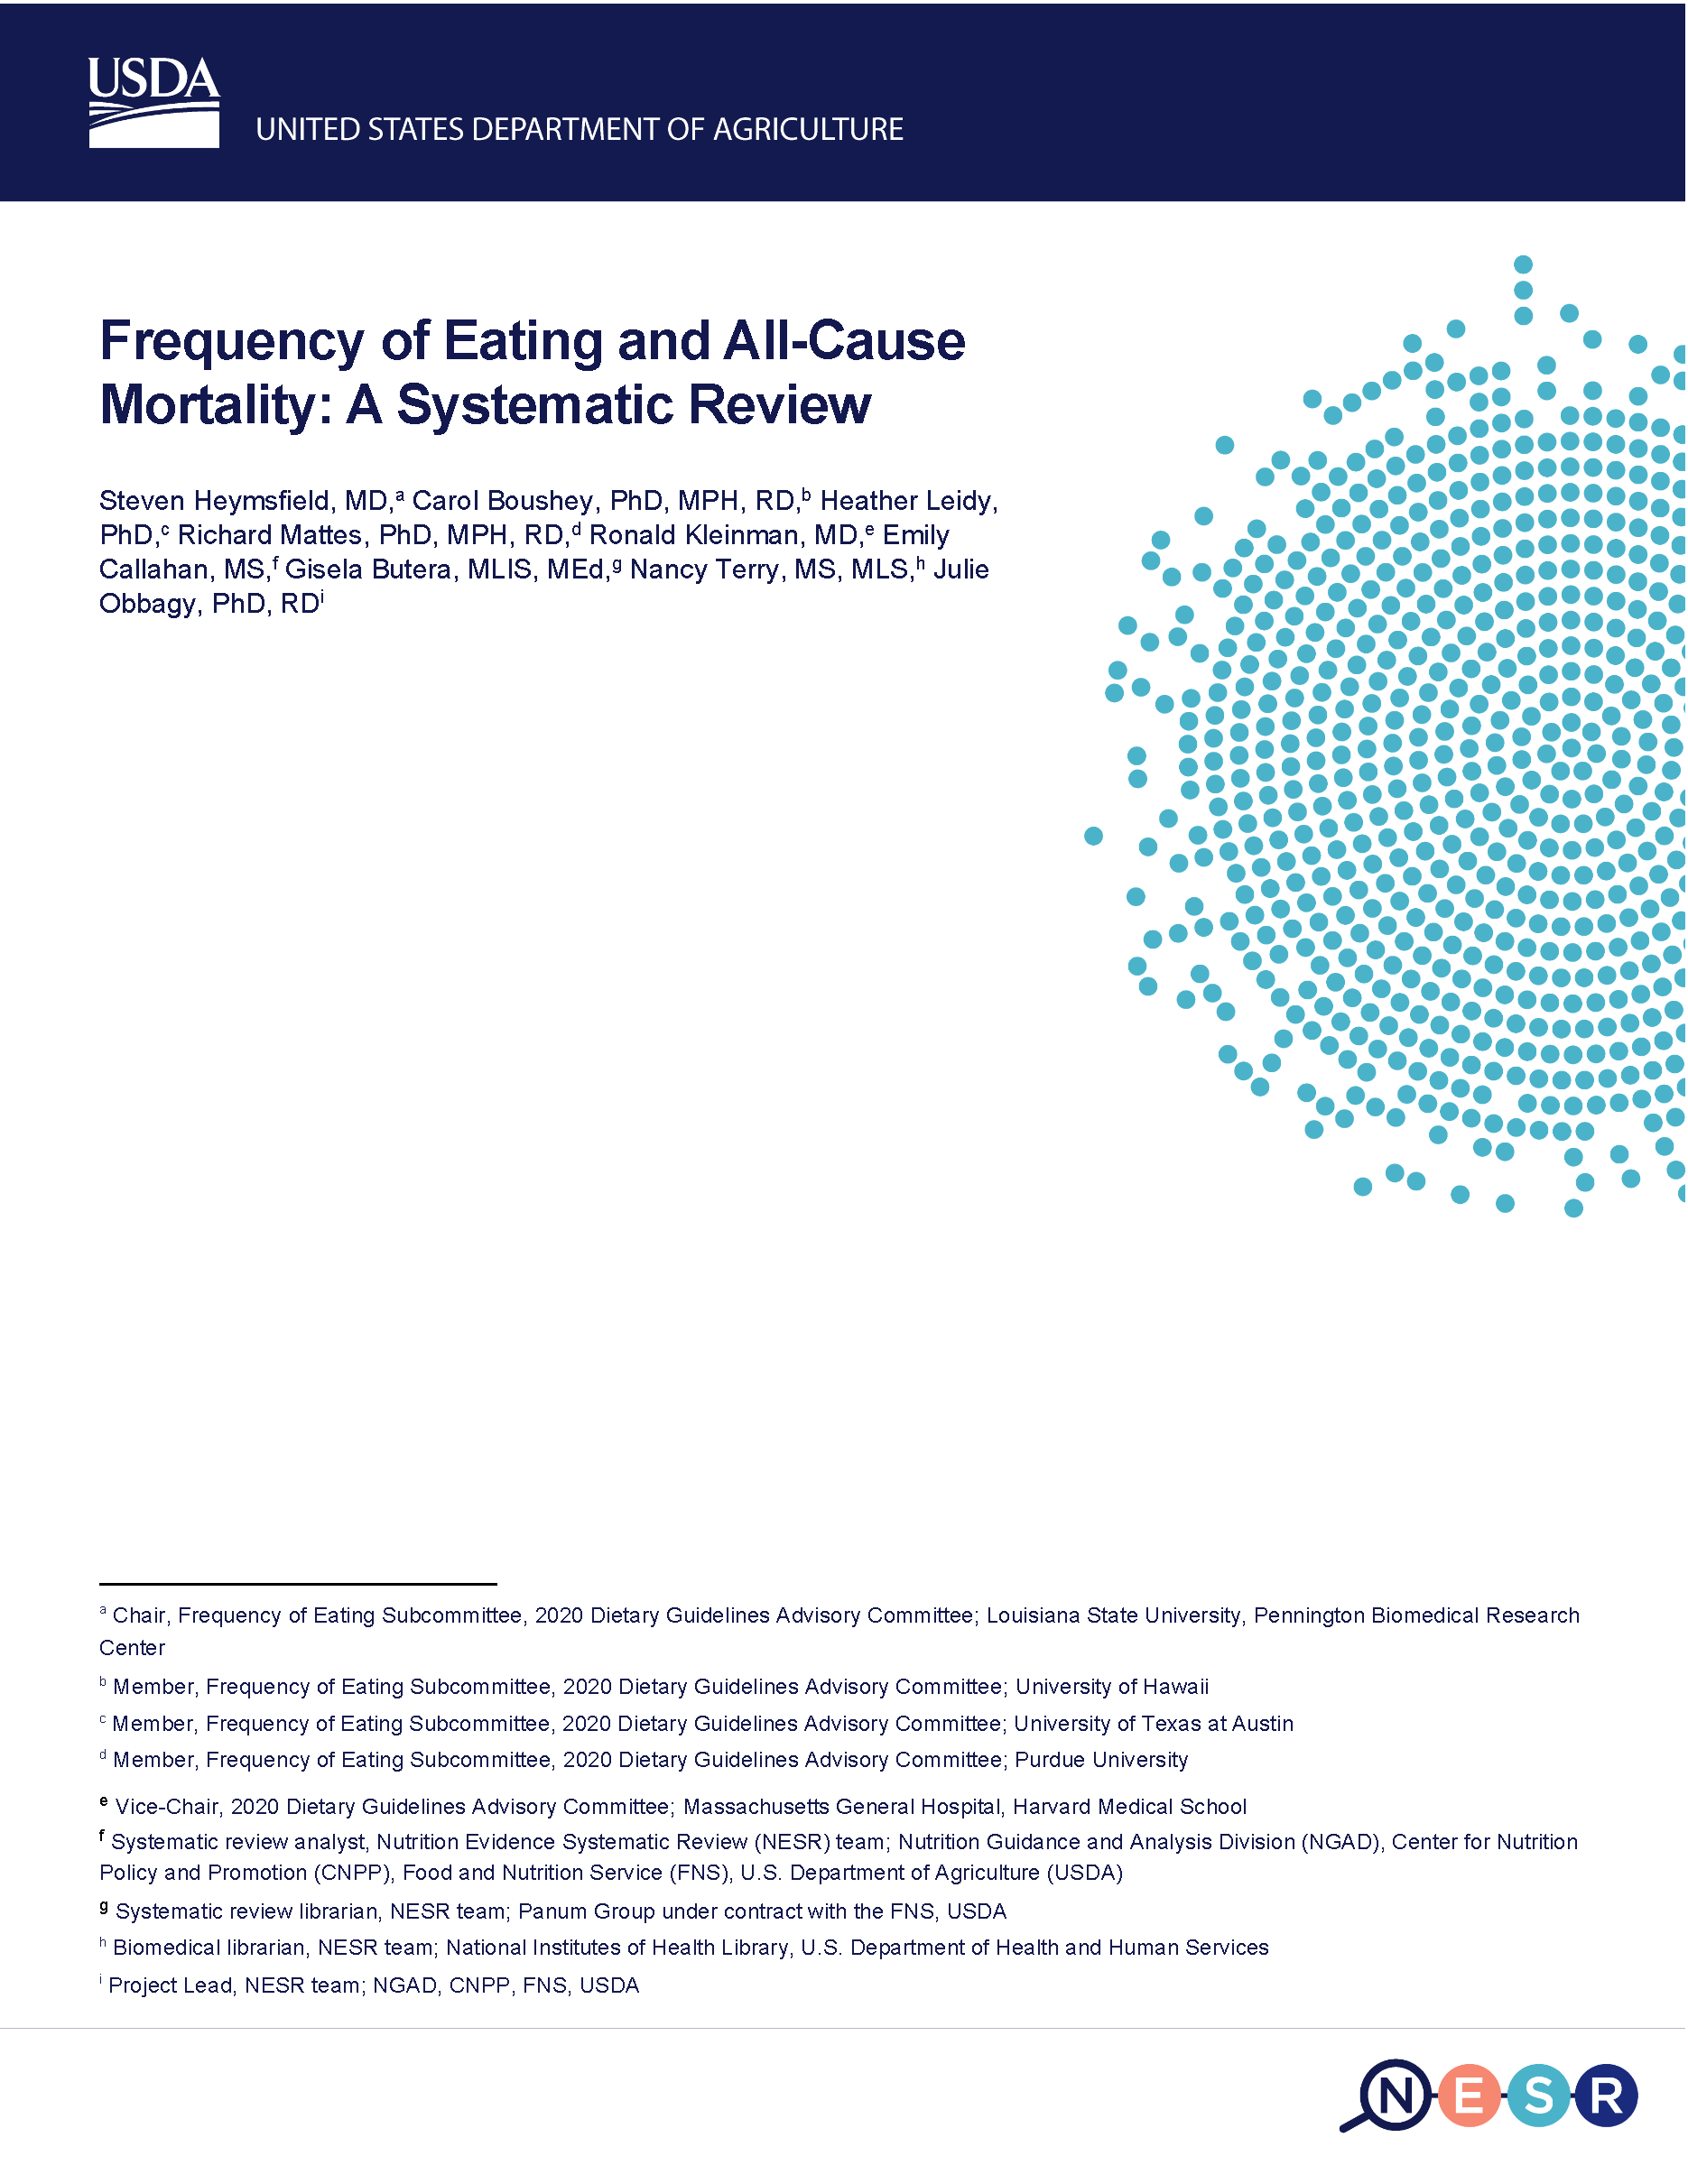 Cover of frequency of eating and all cause mortality report